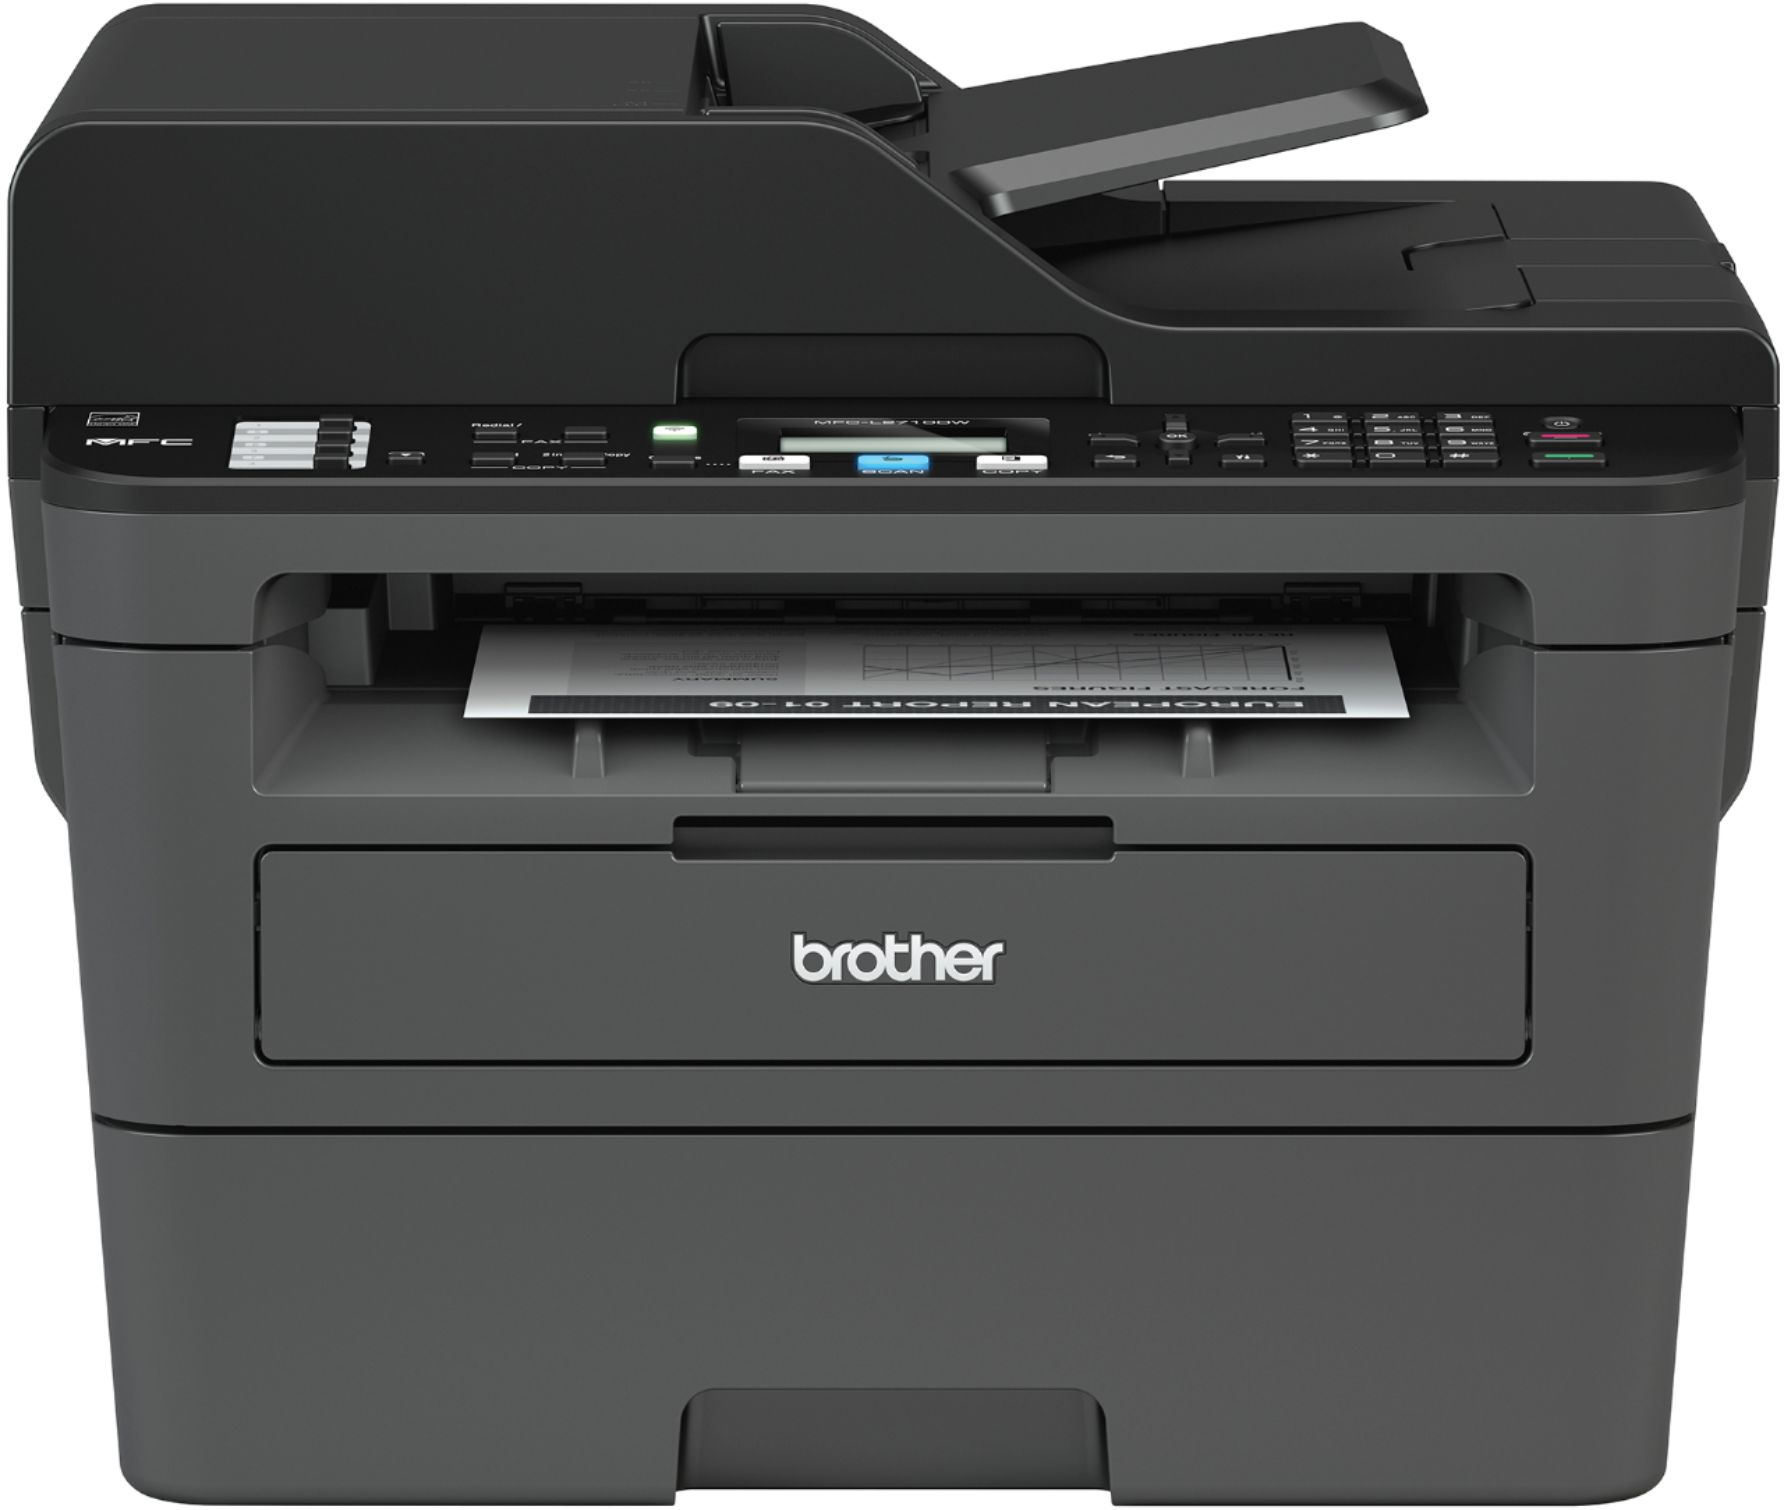 Brother MFC-L2710DW All-In-One Monochrome Laser Printer Scanner Copier Fax 